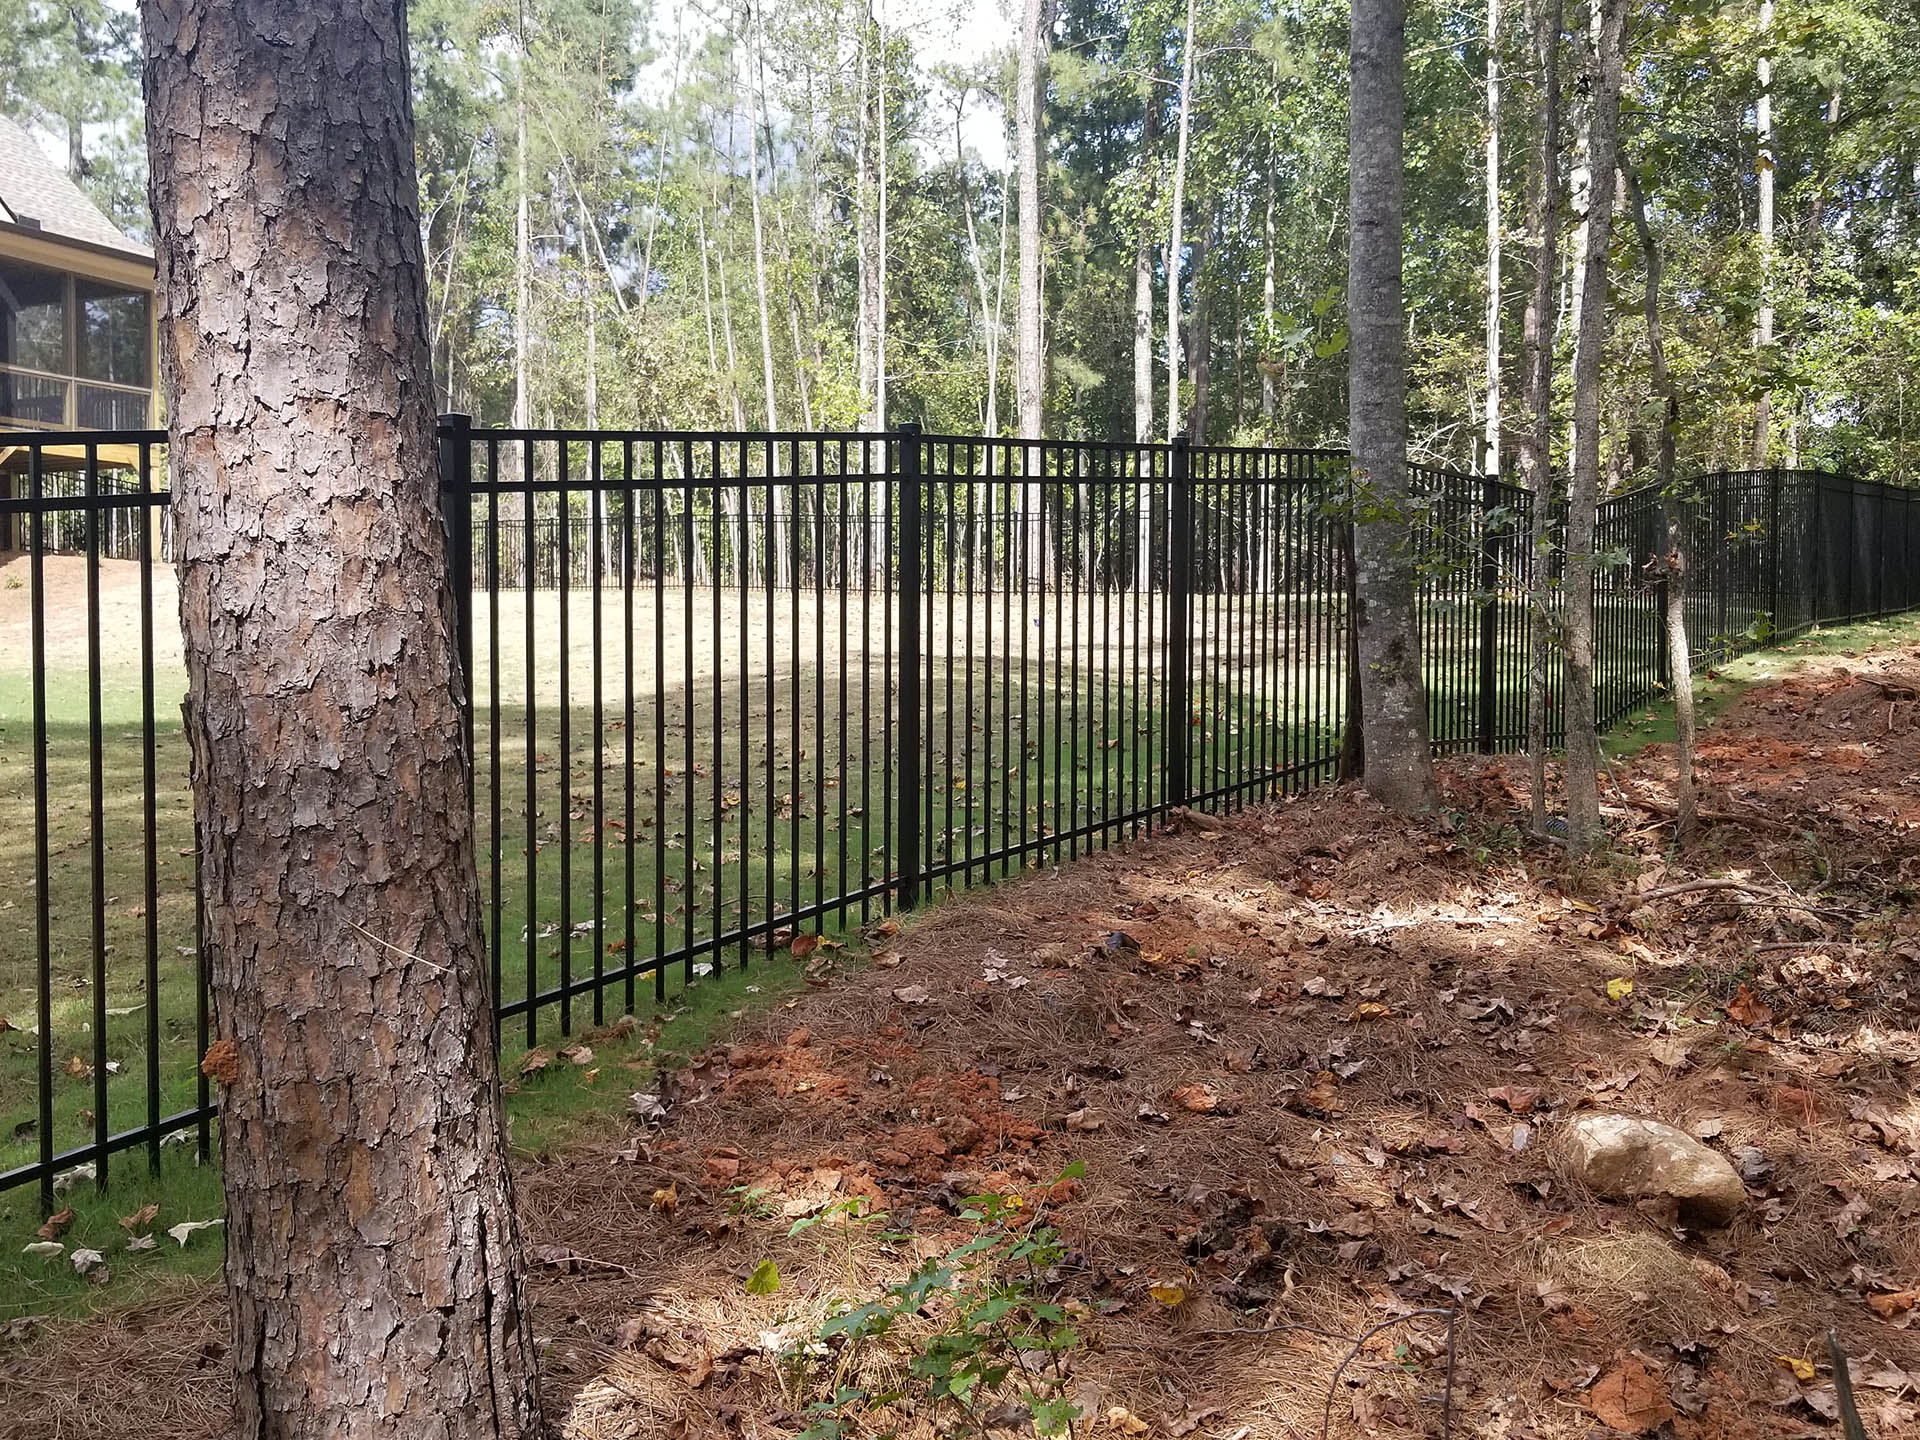 Aluminum fencing on the perimeter of a property with large trees lining the fence.